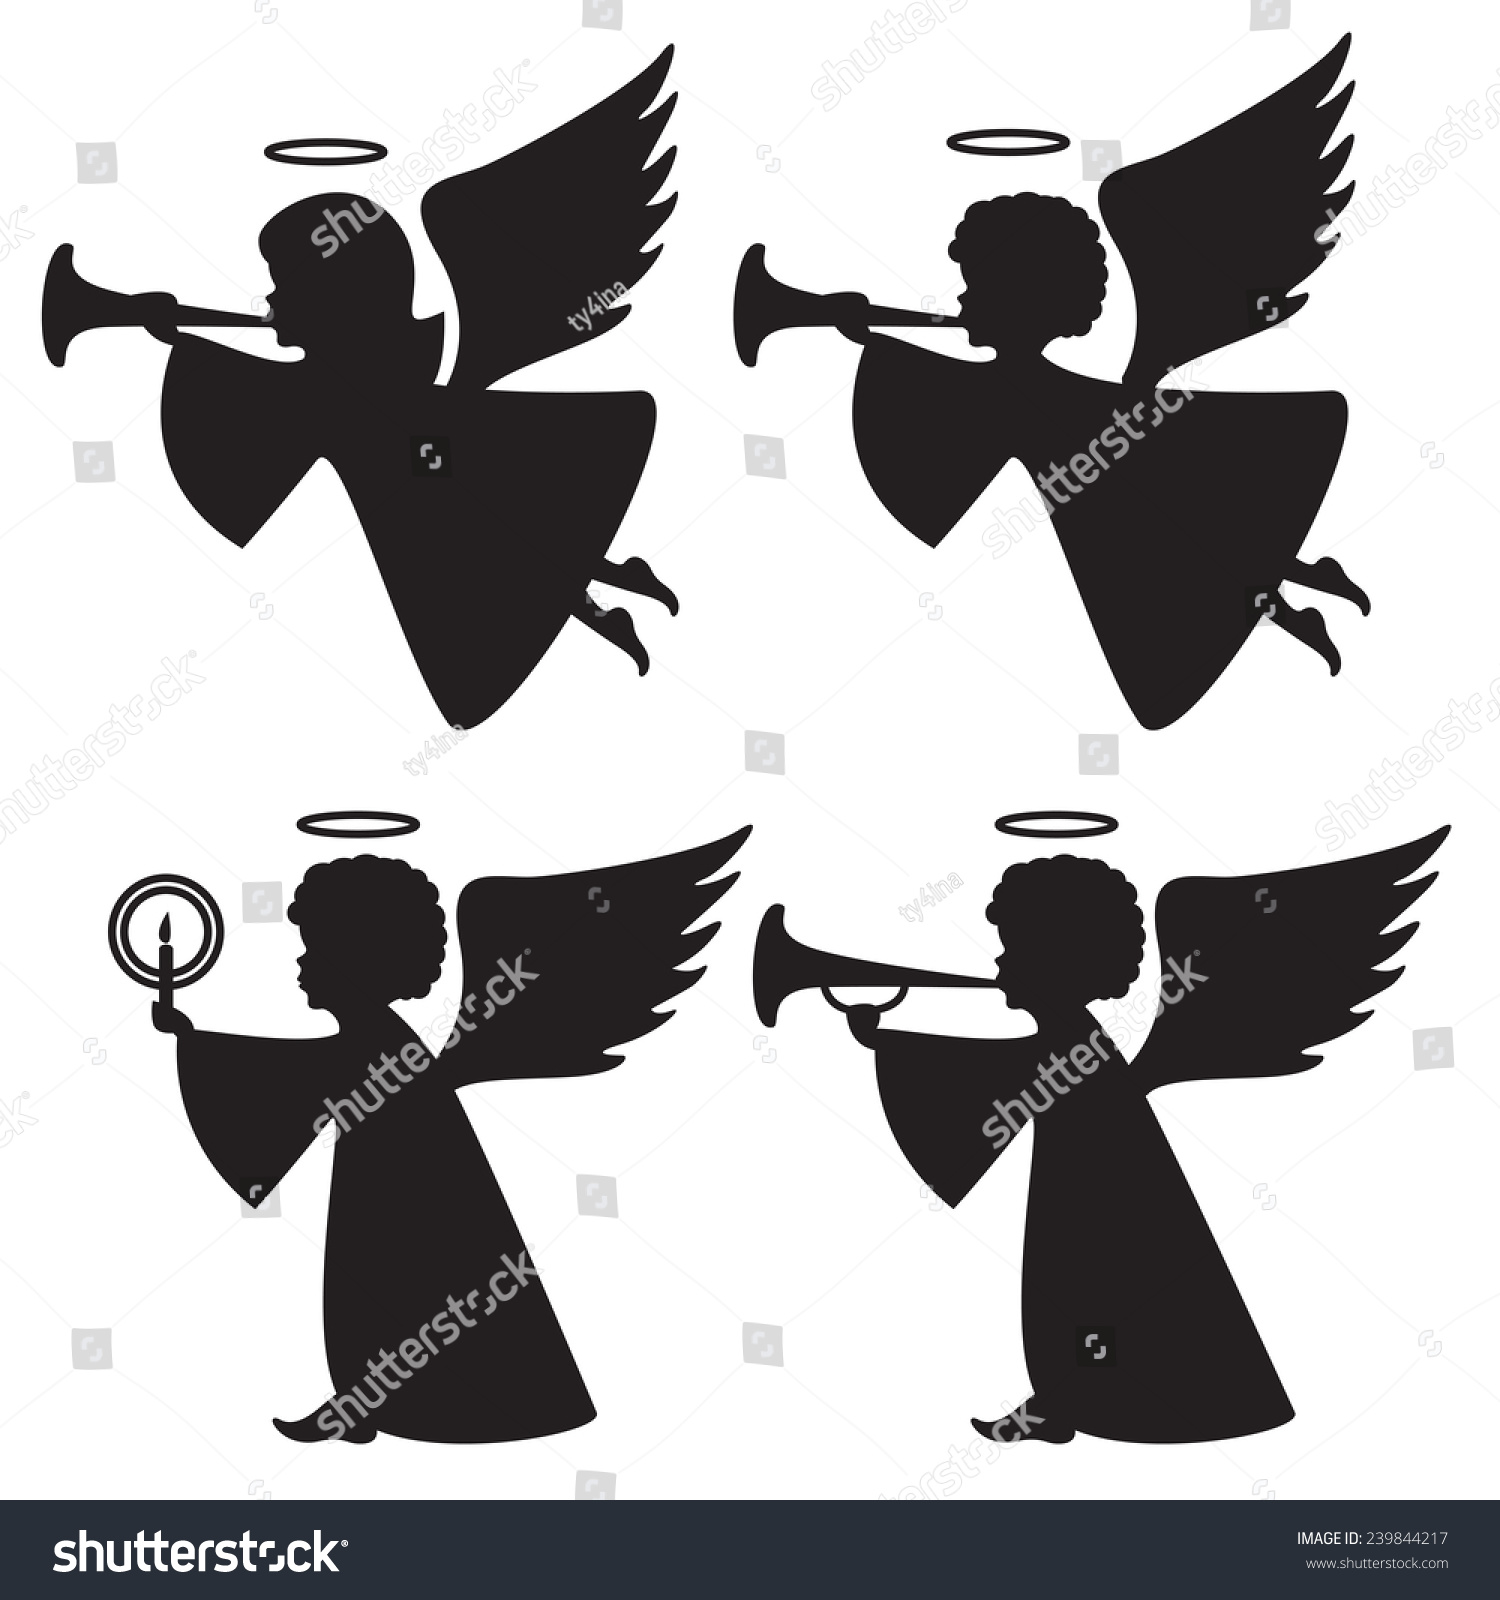 Silhouettes Of Angels Stock Vector Illustration 239844217 : Shutterstock